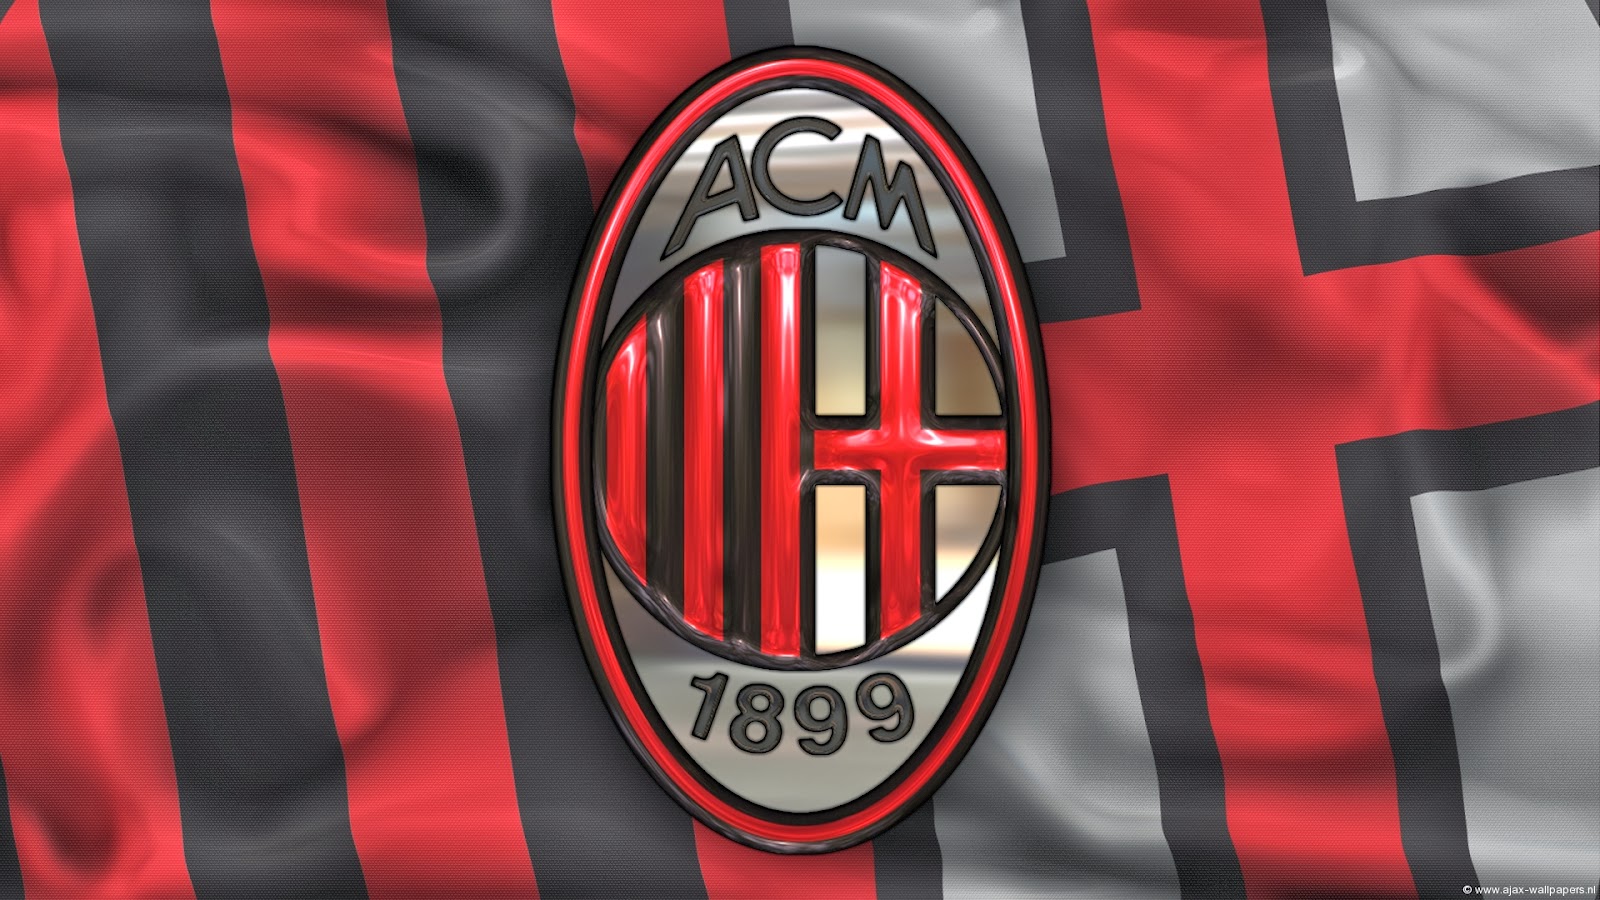 Download this Milan Wallpaper Talented Player picture